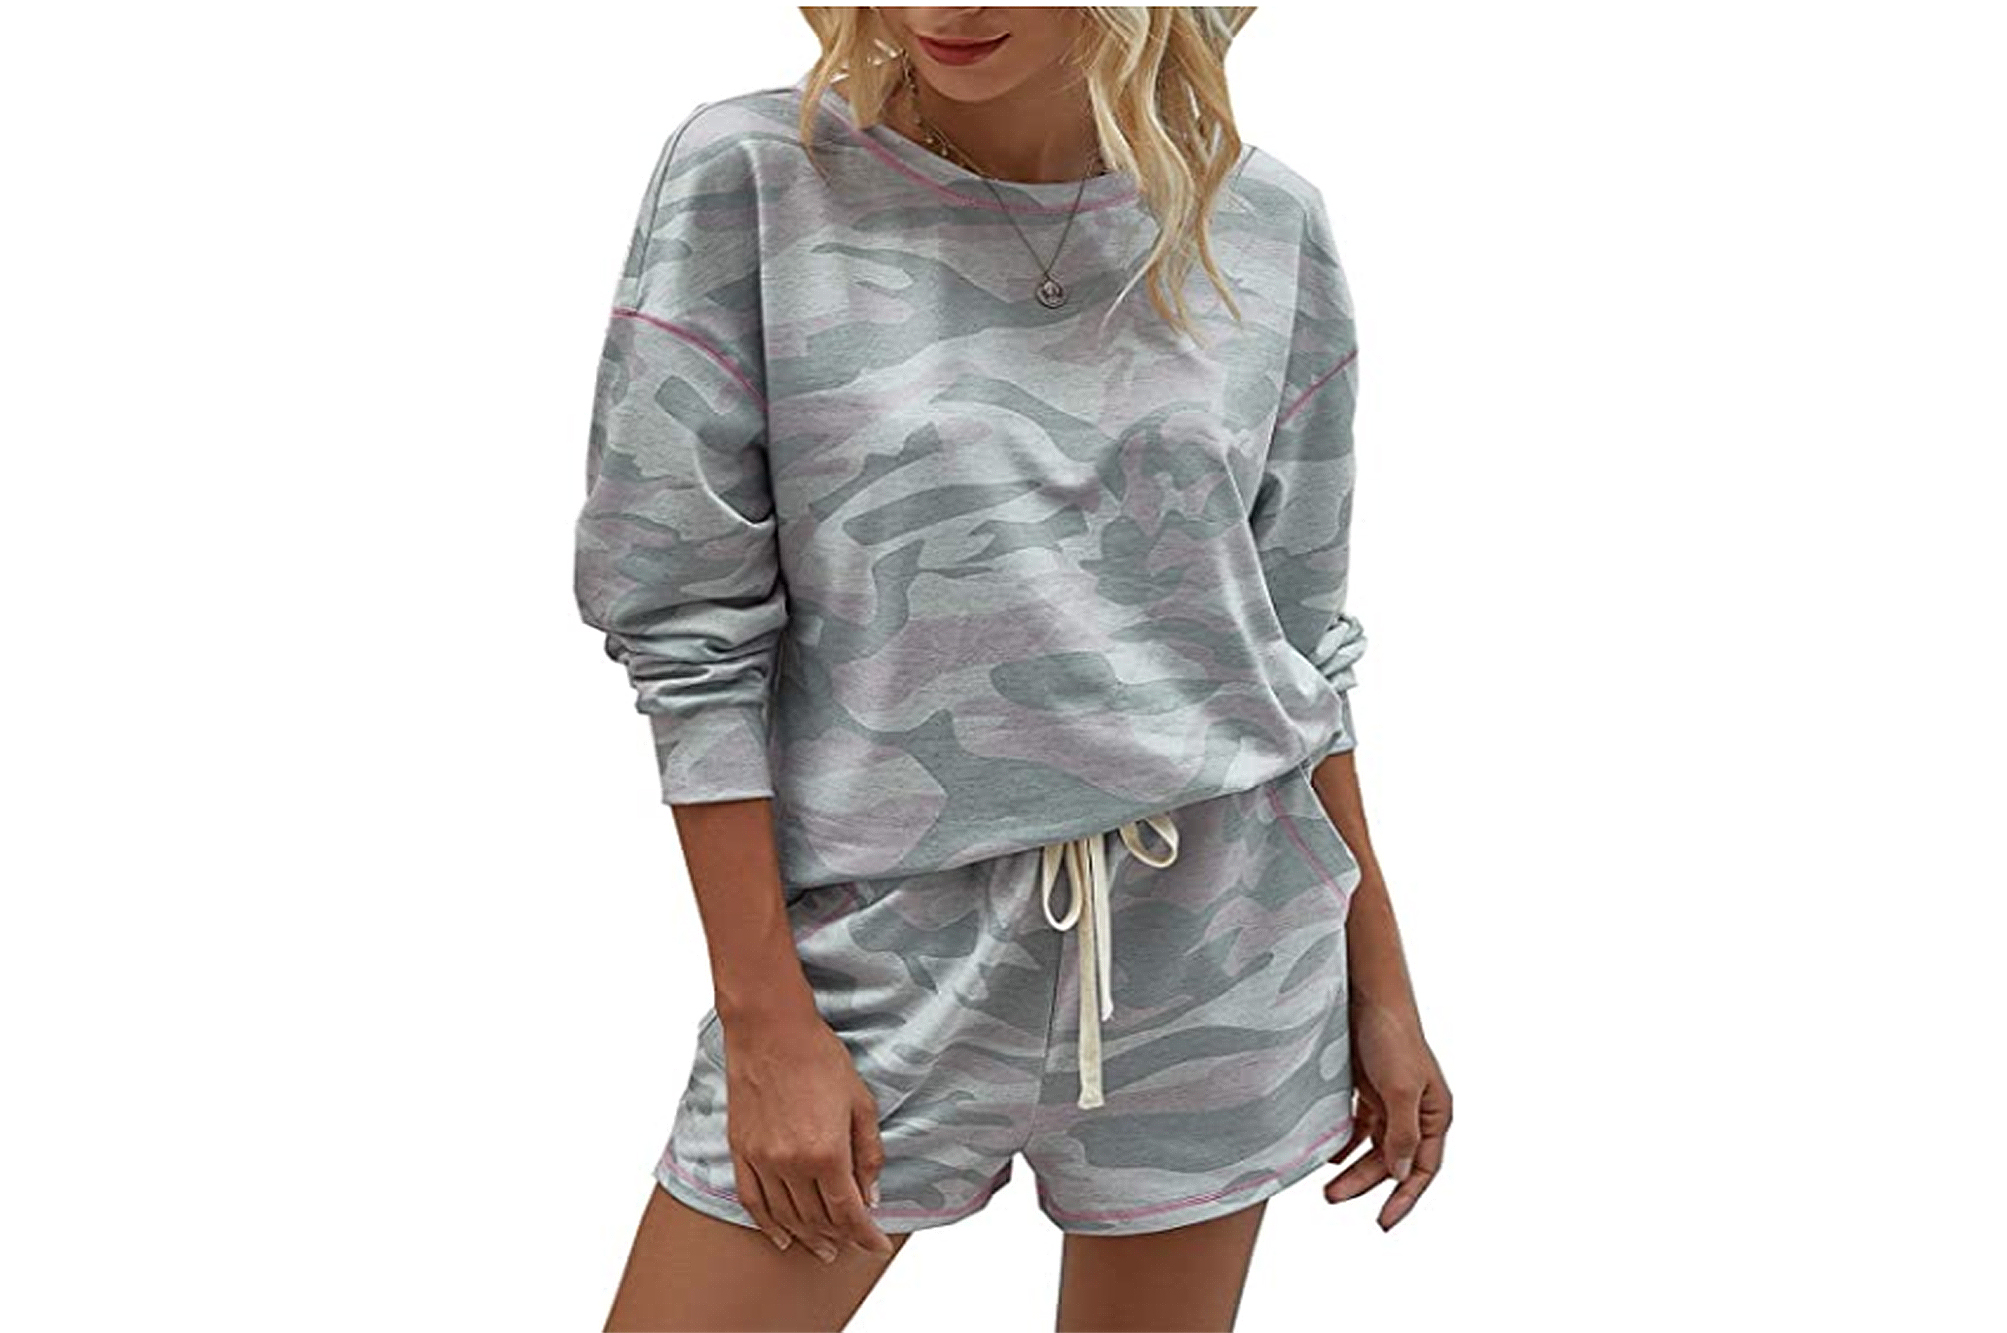 BTFBM Comfy Camo Lounge Set Is Your New Work-From-Home Uniform